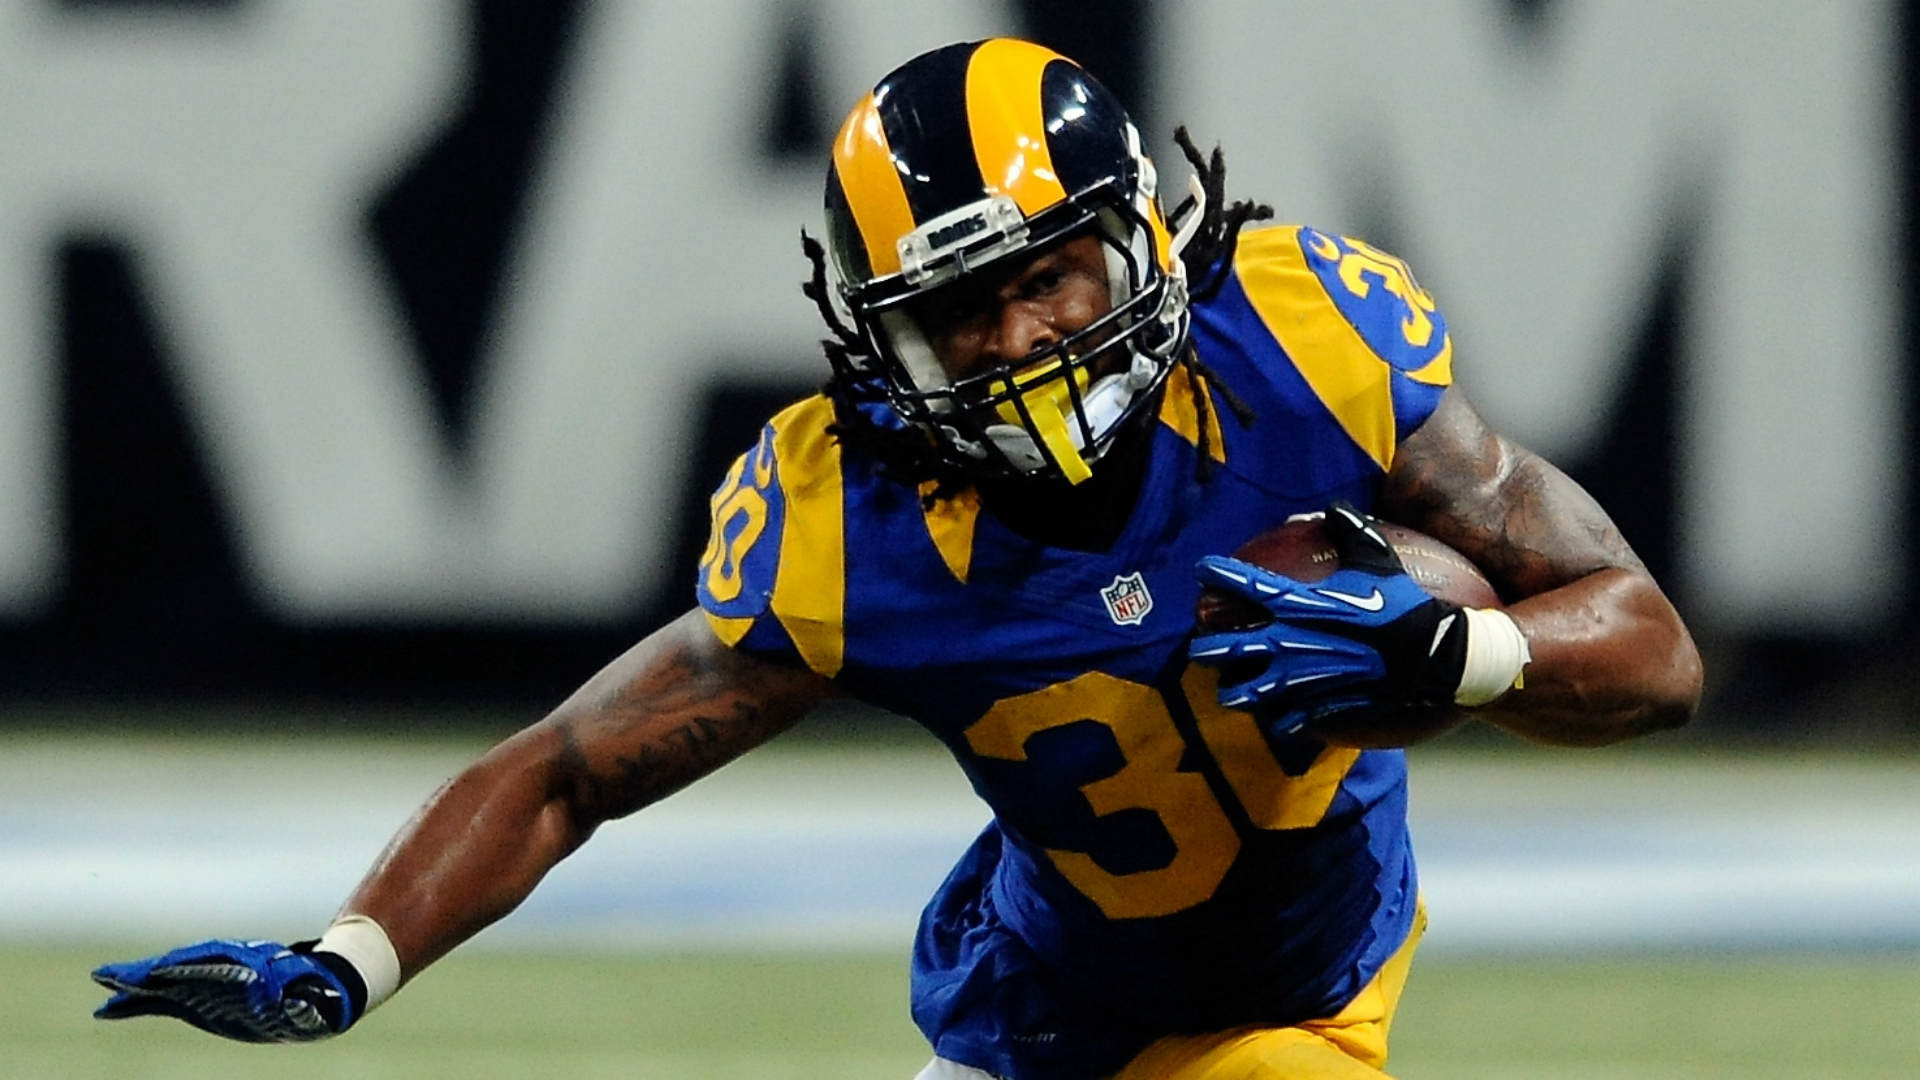 Sporting News NFL Rookie of the Year Todd Gurley rescuing Rams, RB position NFL Sporting News